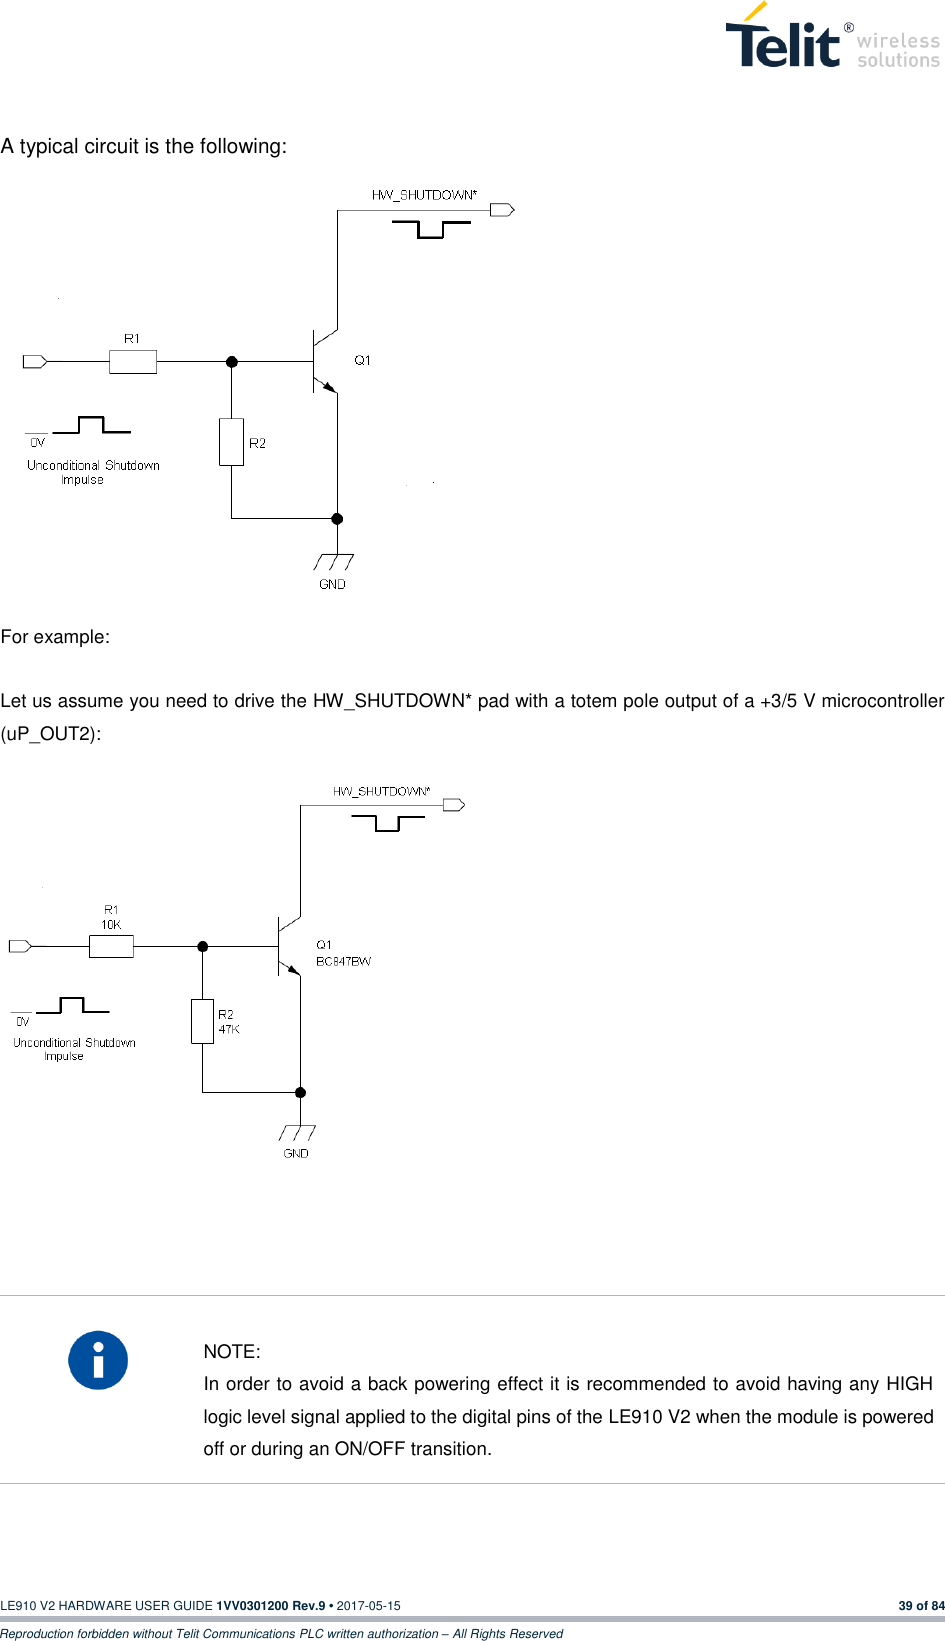   LE910 V2 HARDWARE USER GUIDE 1VV0301200 Rev.9 • 2017-05-15 39 of 84 Reproduction forbidden without Telit Communications PLC written authorization – All Rights Reserved  A typical circuit is the following:                         For example:  Let us assume you need to drive the HW_SHUTDOWN* pad with a totem pole output of a +3/5 V microcontroller (uP_OUT2):                     NOTE: In order to avoid a back powering effect it is recommended to avoid having any HIGH logic level signal applied to the digital pins of the LE910 V2 when the module is powered off or during an ON/OFF transition.    